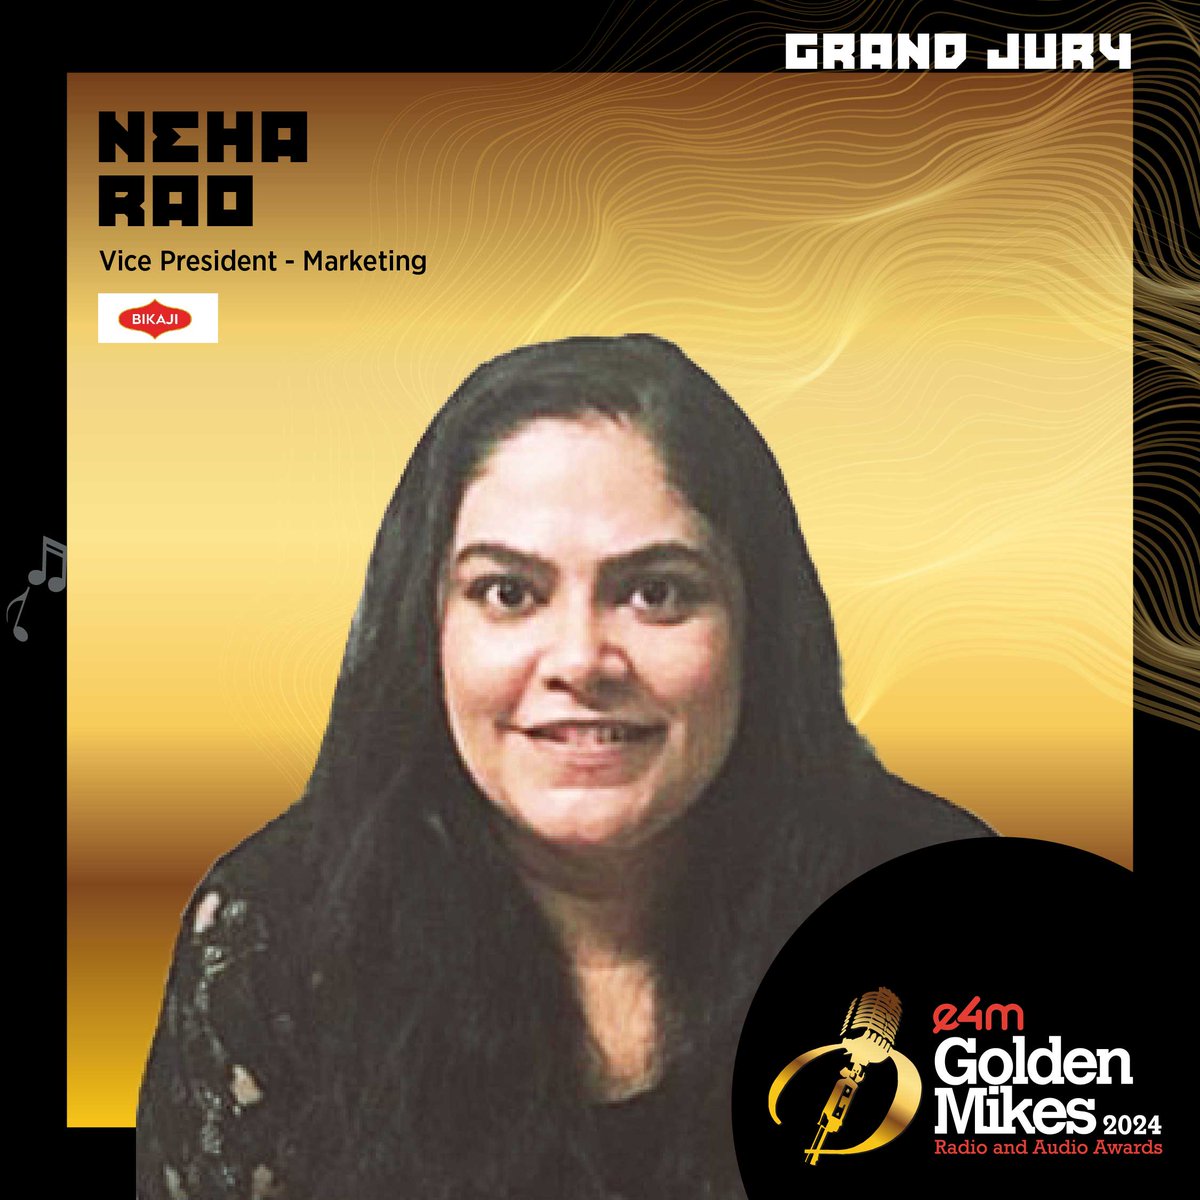 Pleased to welcome Neha Rao , Vice President - Marketing  at Bikaji Foods International Ltd. - India as a Grand Jury member for e4m Golden Mikes 2024.

#GoldenMikes #e4mevents #RadioAwards #audio #podcast #brands #agencies